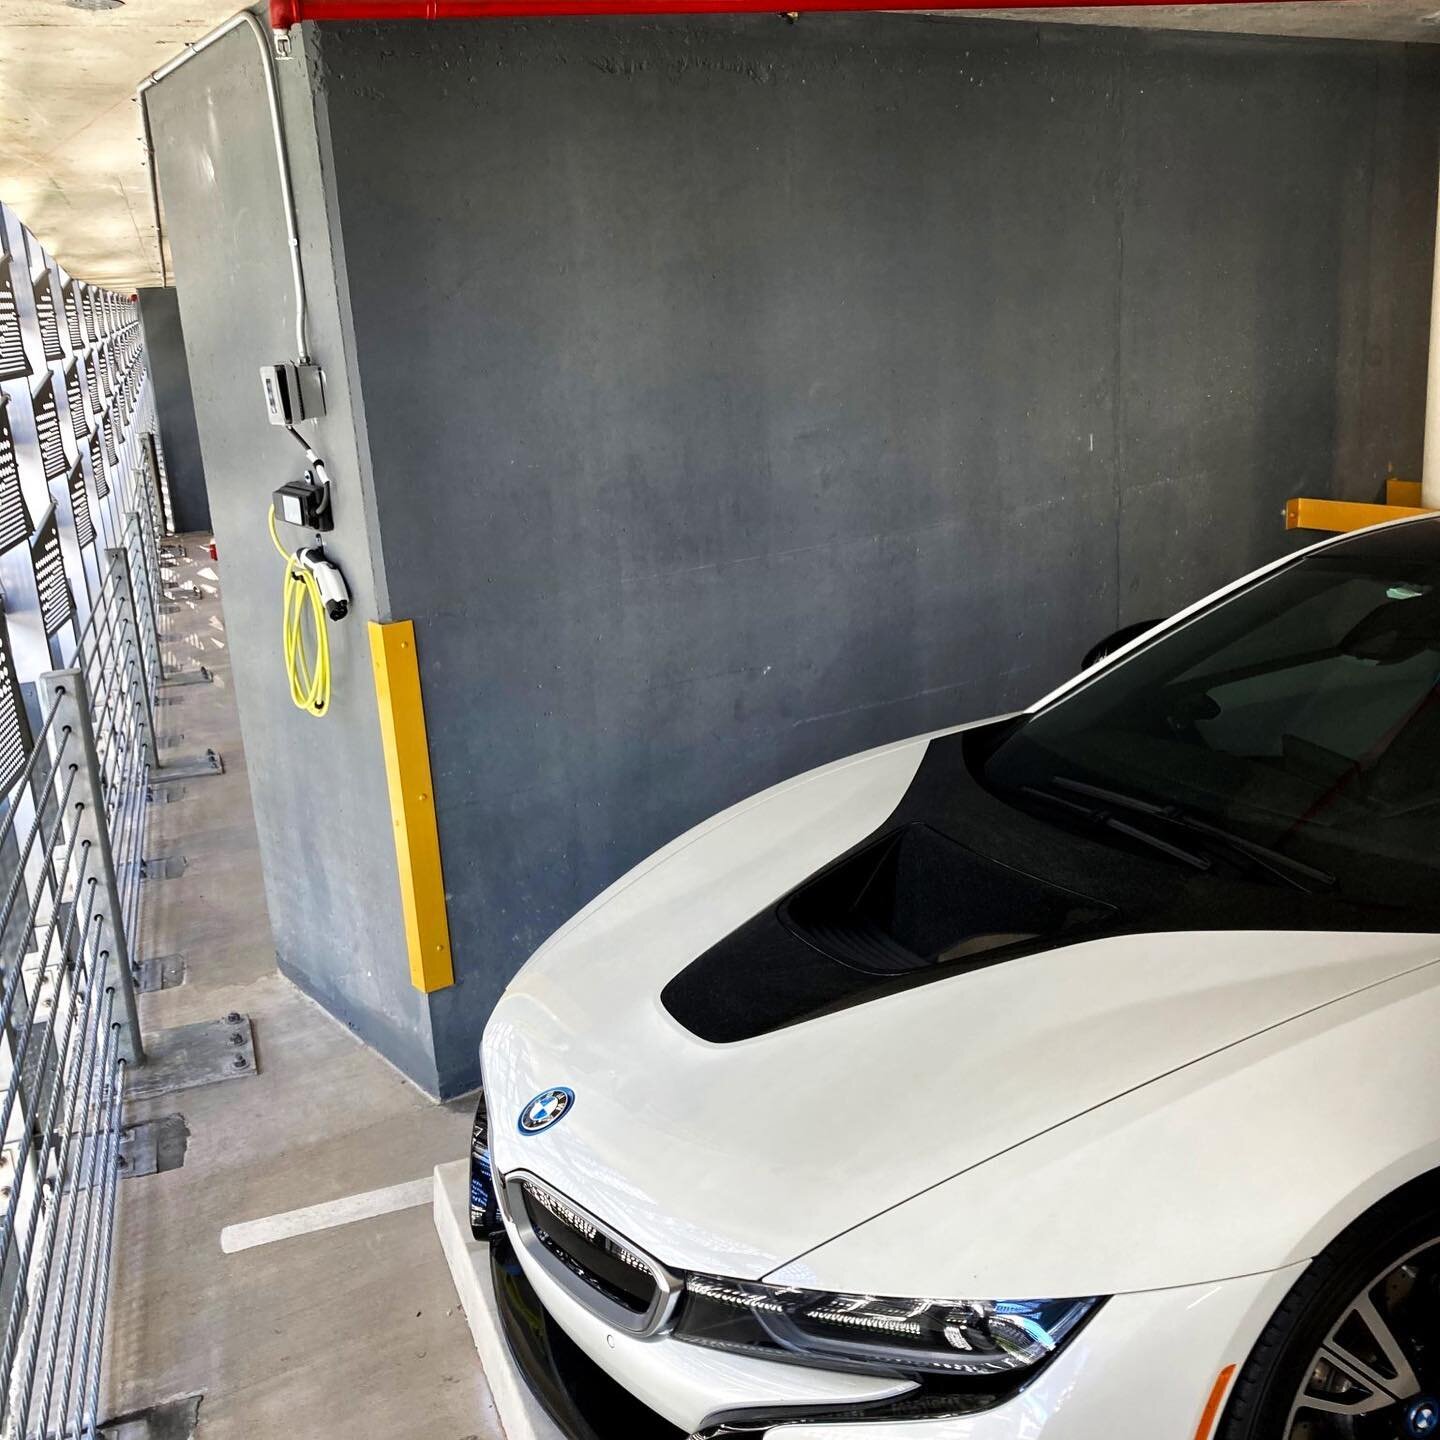 Electric Vehicle Charger Installation for a #BMW i8 in a Condo parking garage in Miami, FL
.
.
.
.
.
#bmwi8 #evcharging #evcharger #evcar #electricvehicle #bmw #miami #brickell